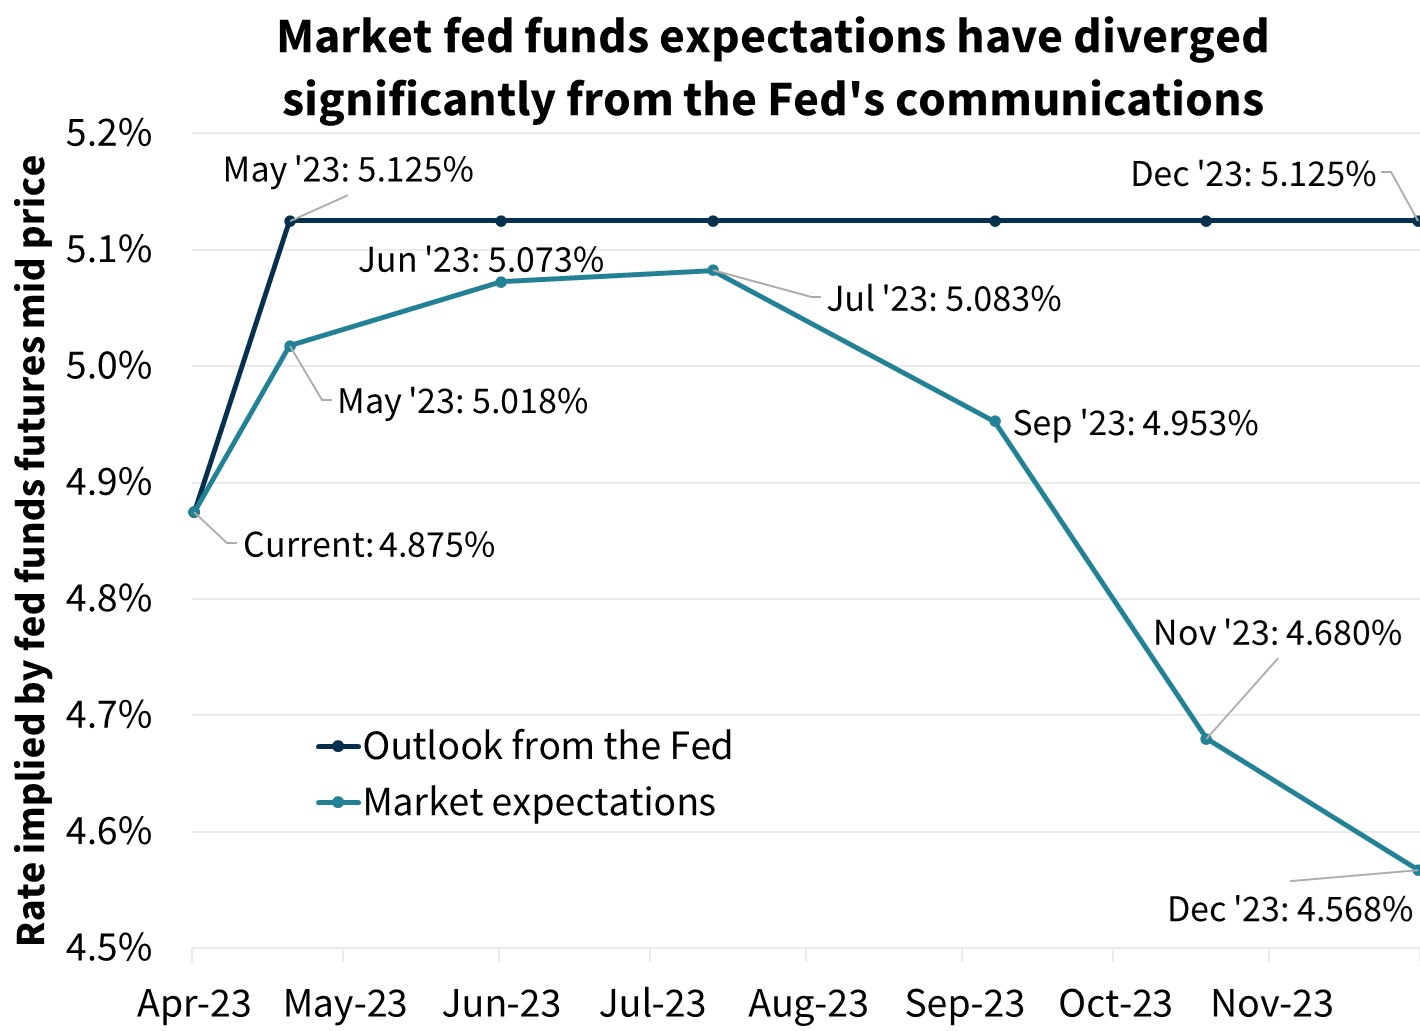  Market fed funds expectations have diverged significantly from the Fed’s communications 